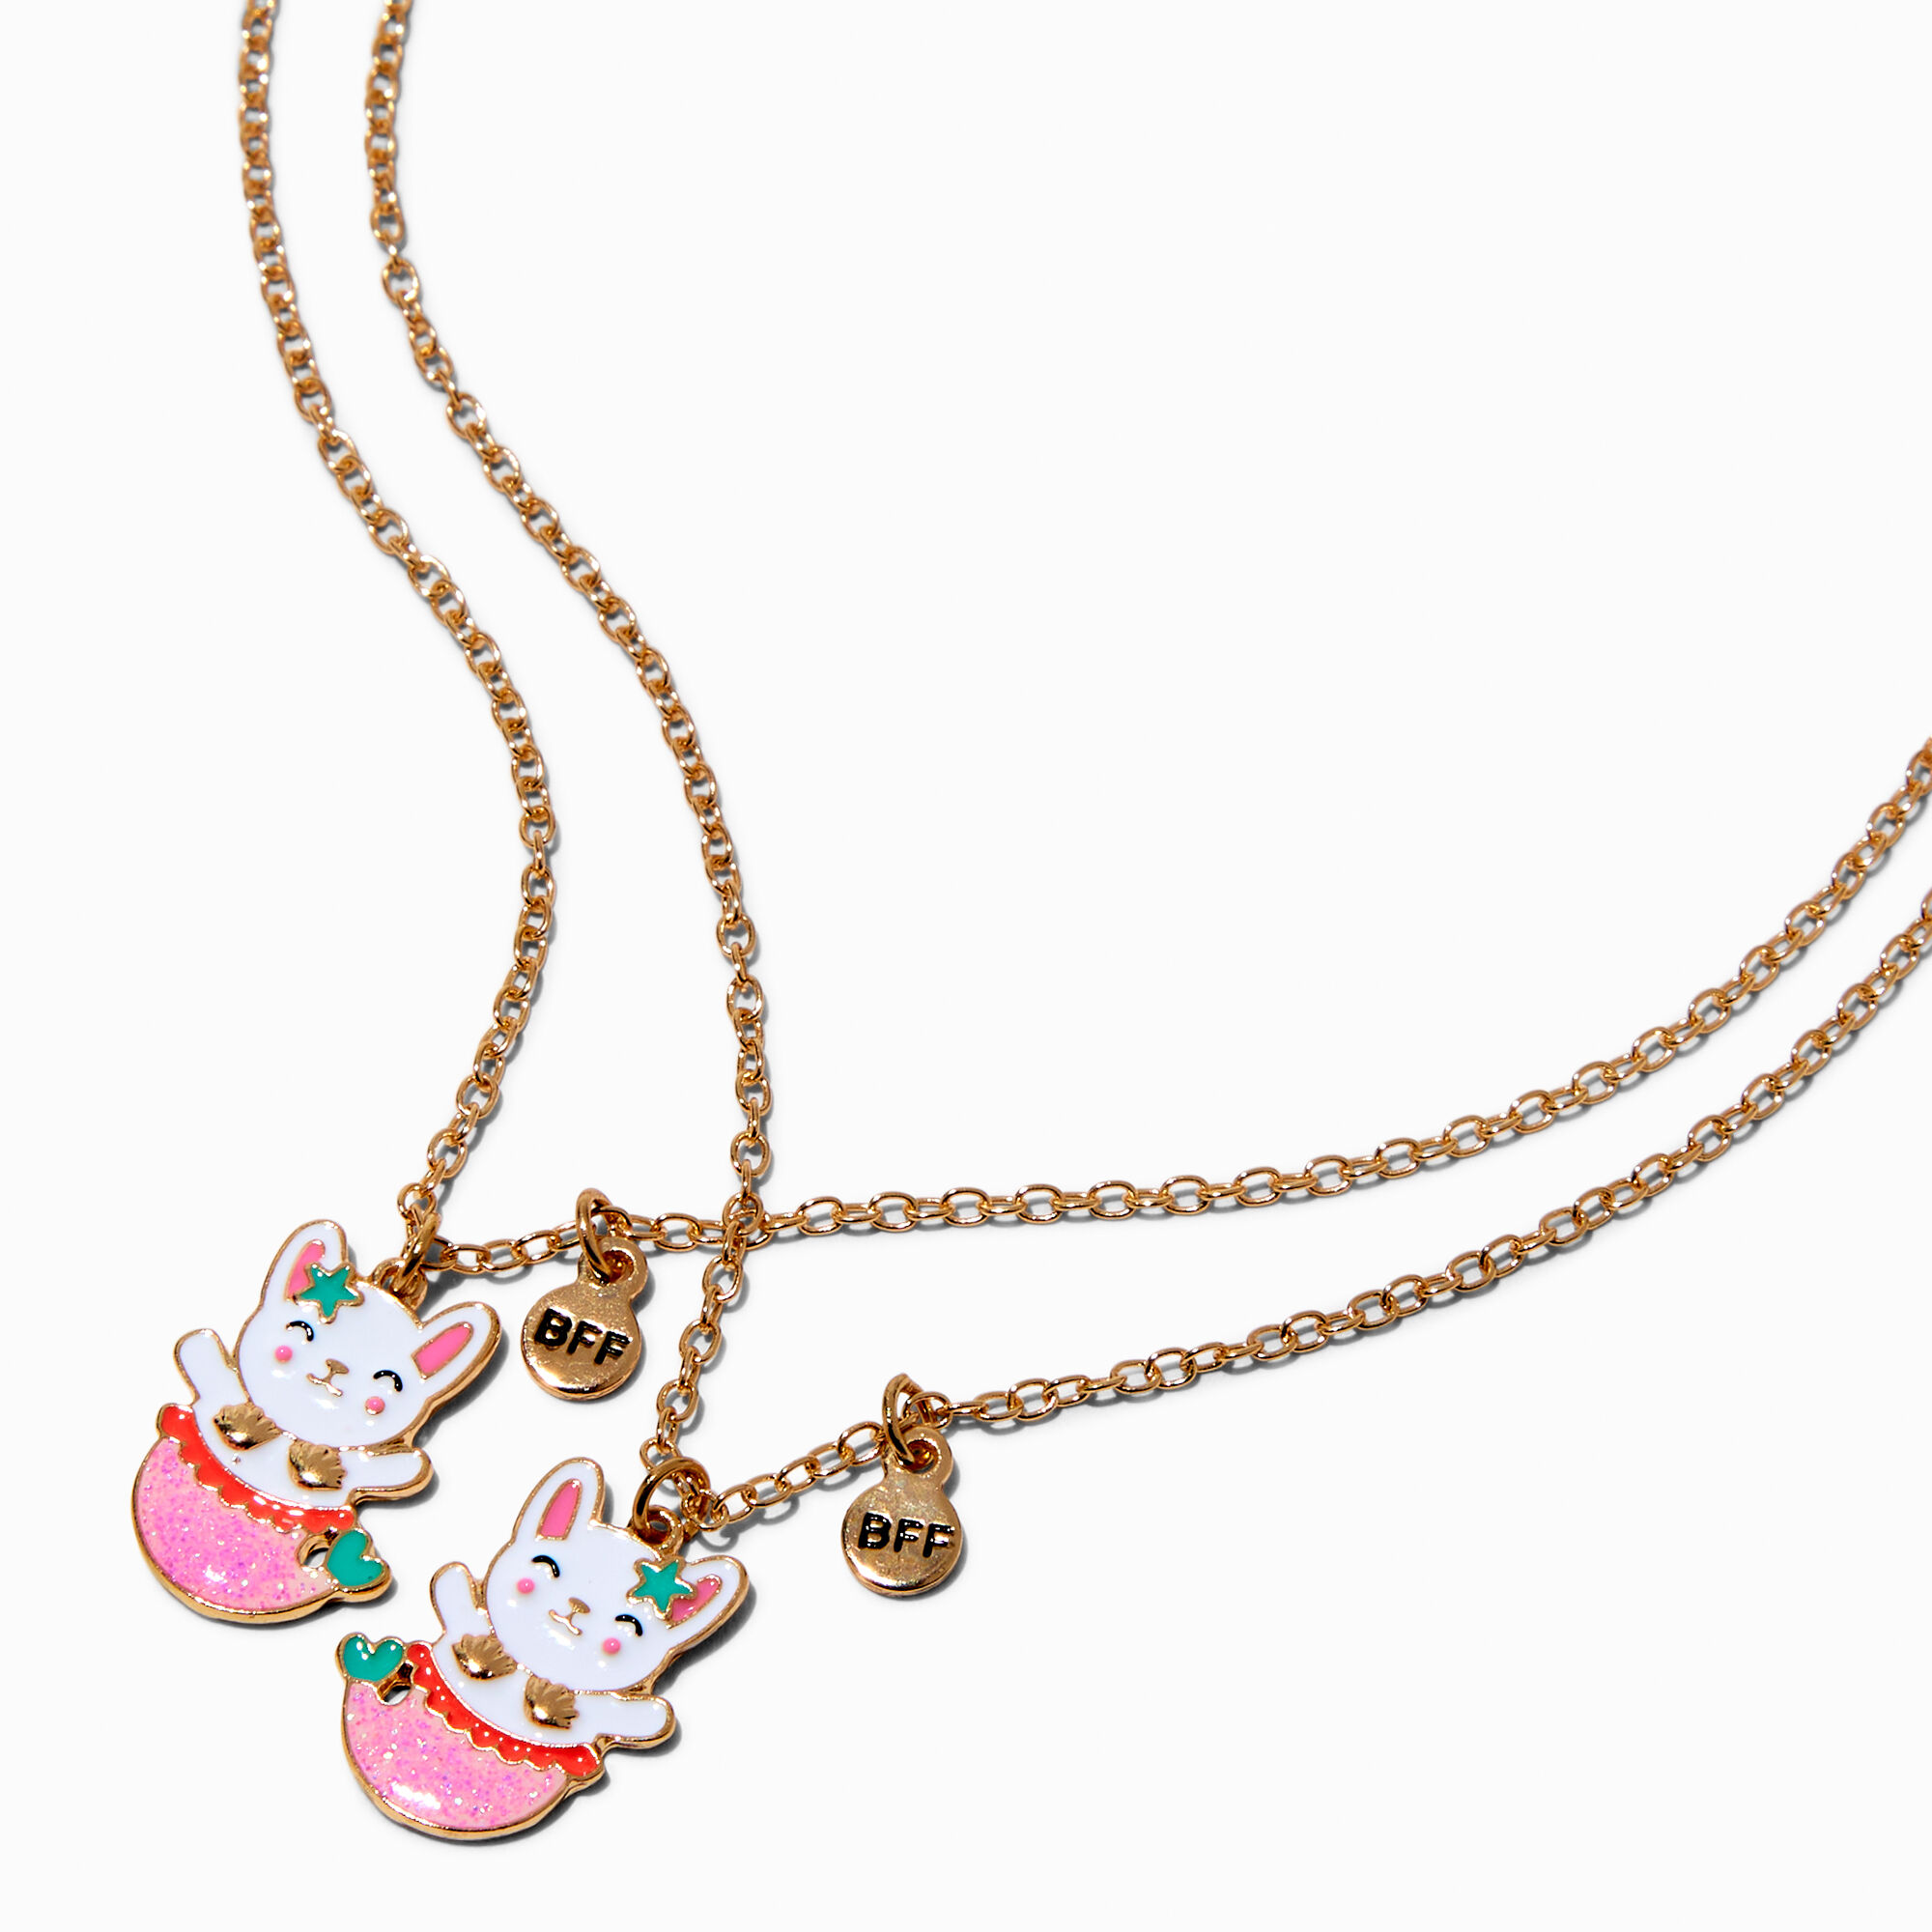 View Claires Best Friends Bunny Mermaid Pendant Necklaces 2 Pack Gold information